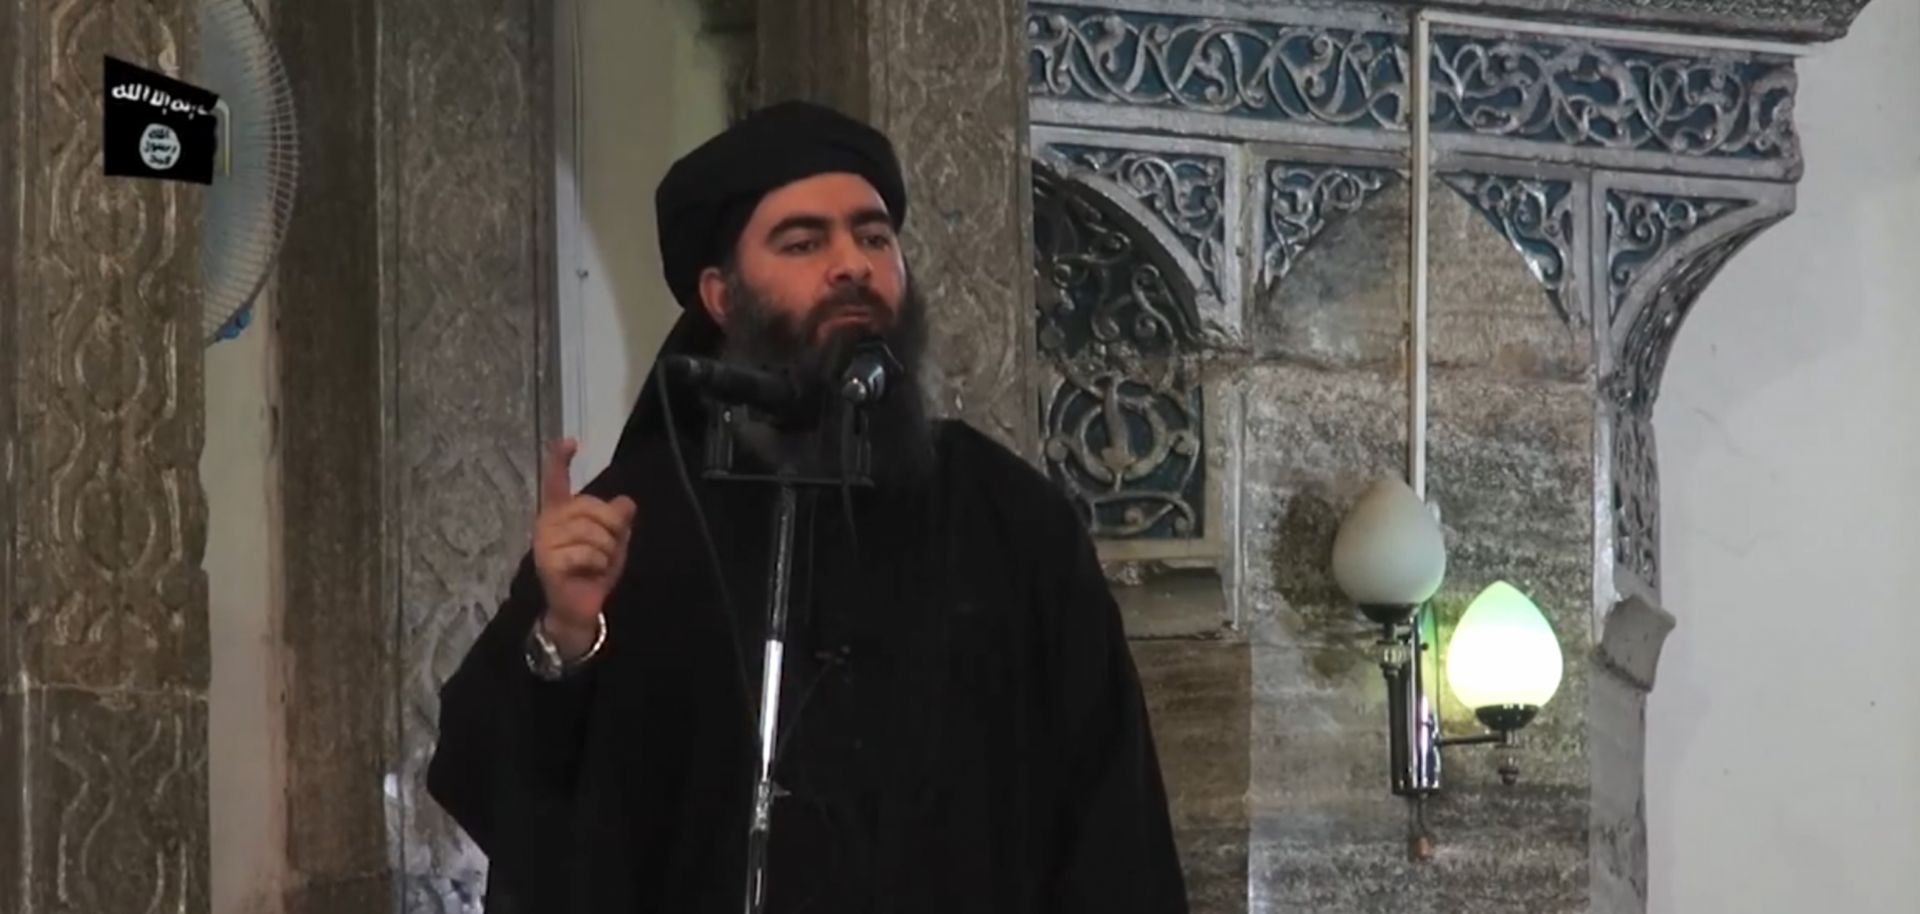 An image grab from a 2014 propaganda video released by al-Furqan media allegedly showing Islamic State Abu Bakr al-Baghdadi addressing worshippers at a mosque in the Iraqi city of Mosul.